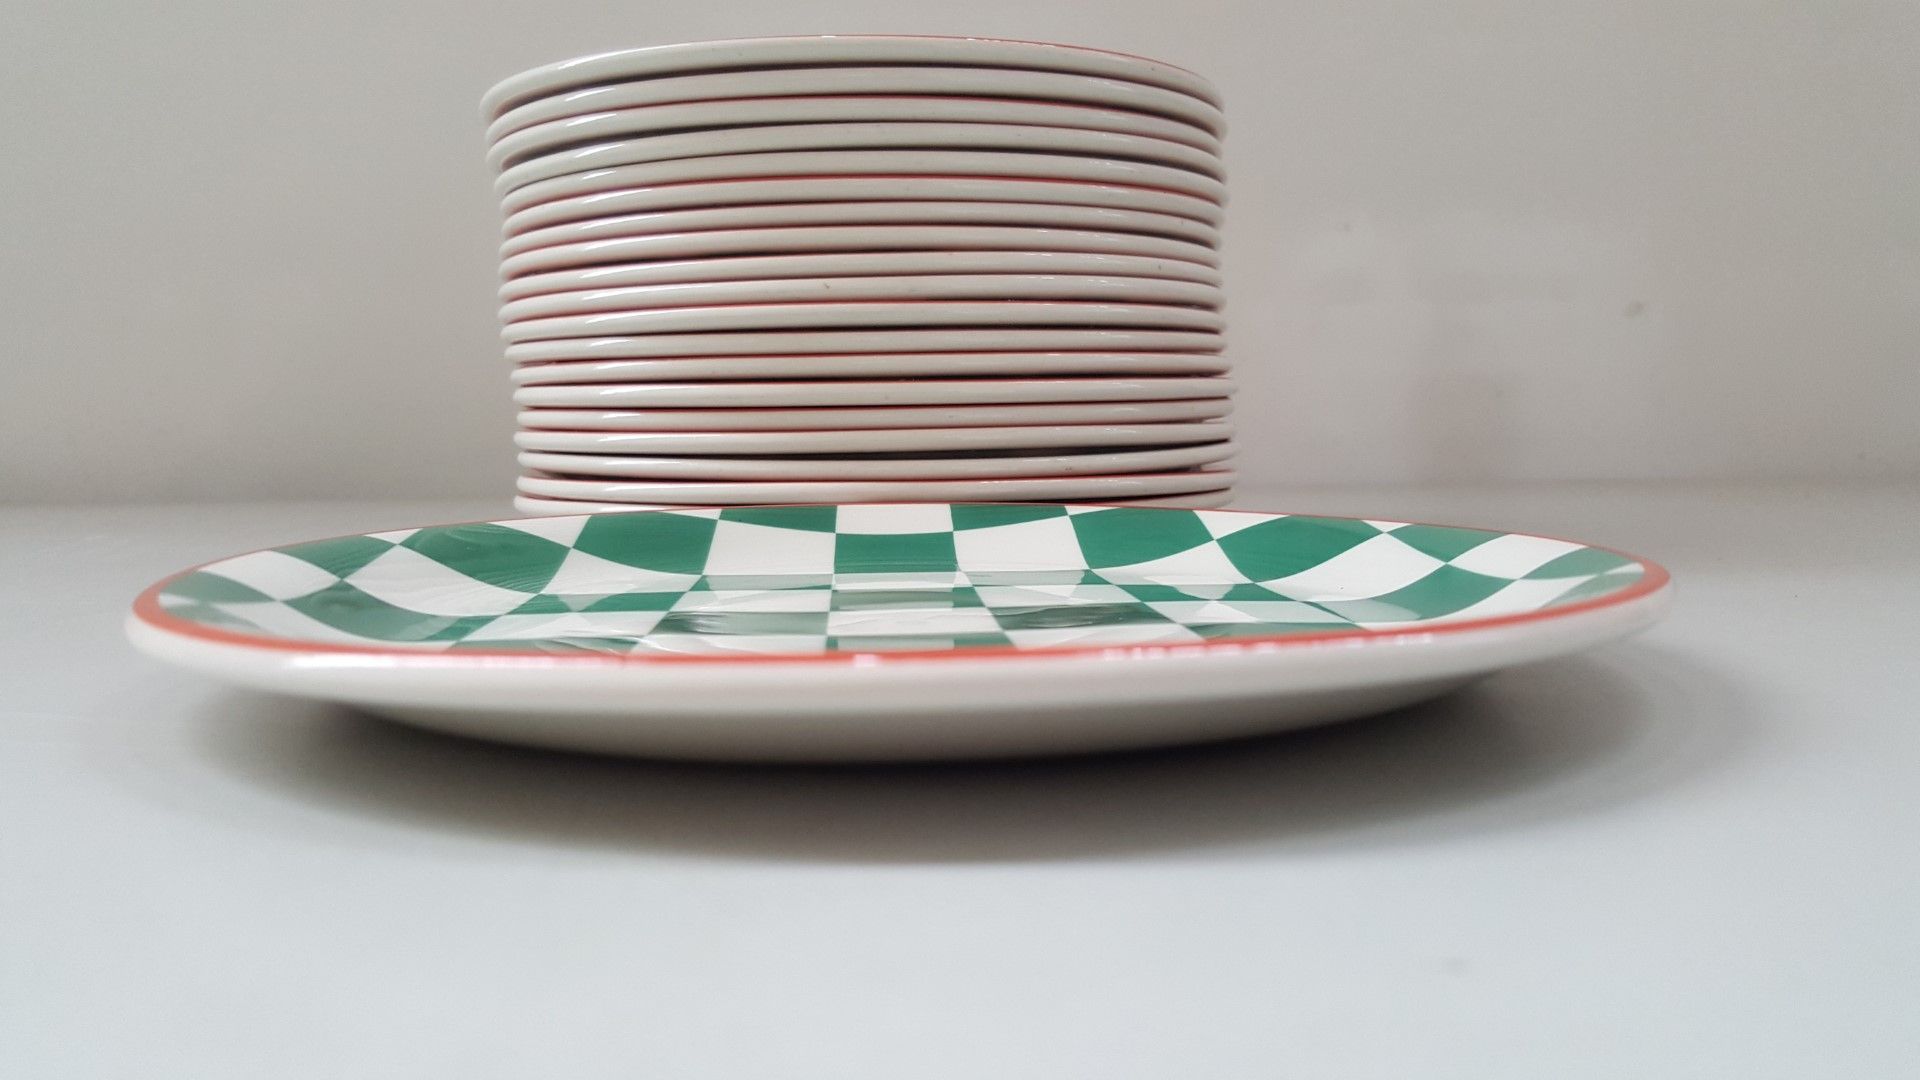 20 x Steelite Plates Checkered Green&White With Red Outline 20CM - Ref CQ284 - Image 3 of 4